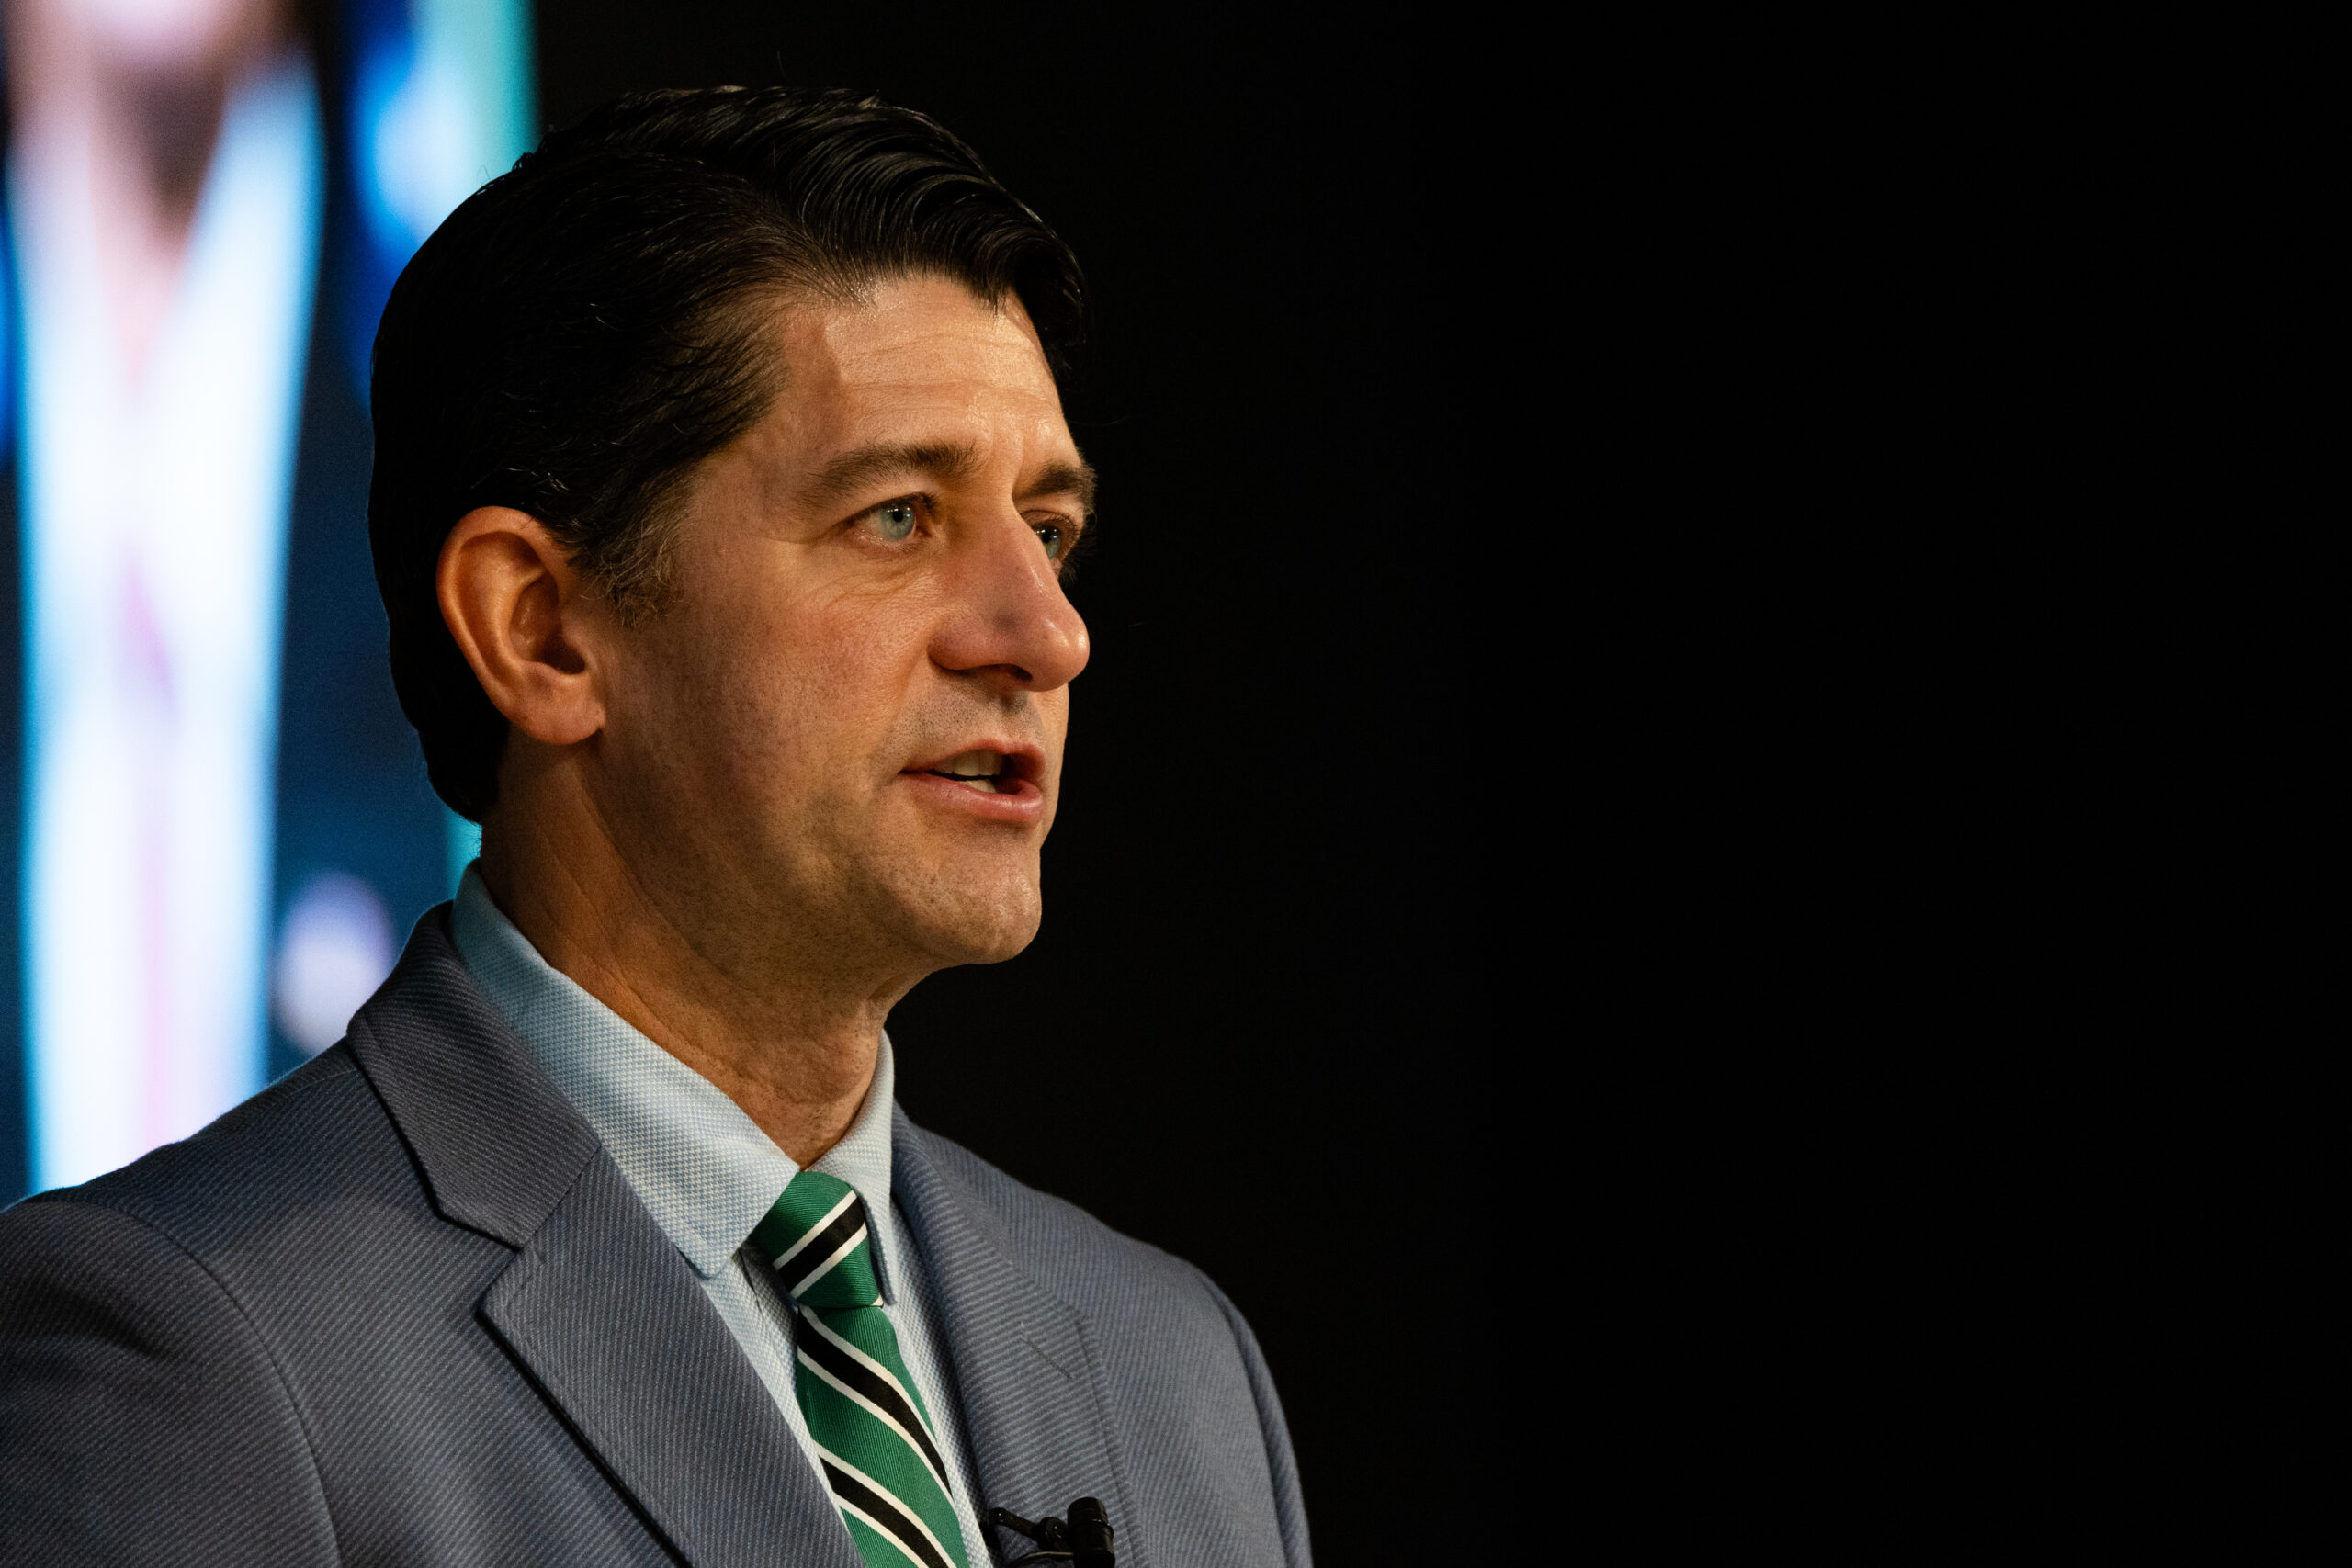 Paul Ryan, a former U.S. House speaker and the 2012 Republican vice presidential candidate, speaks ...